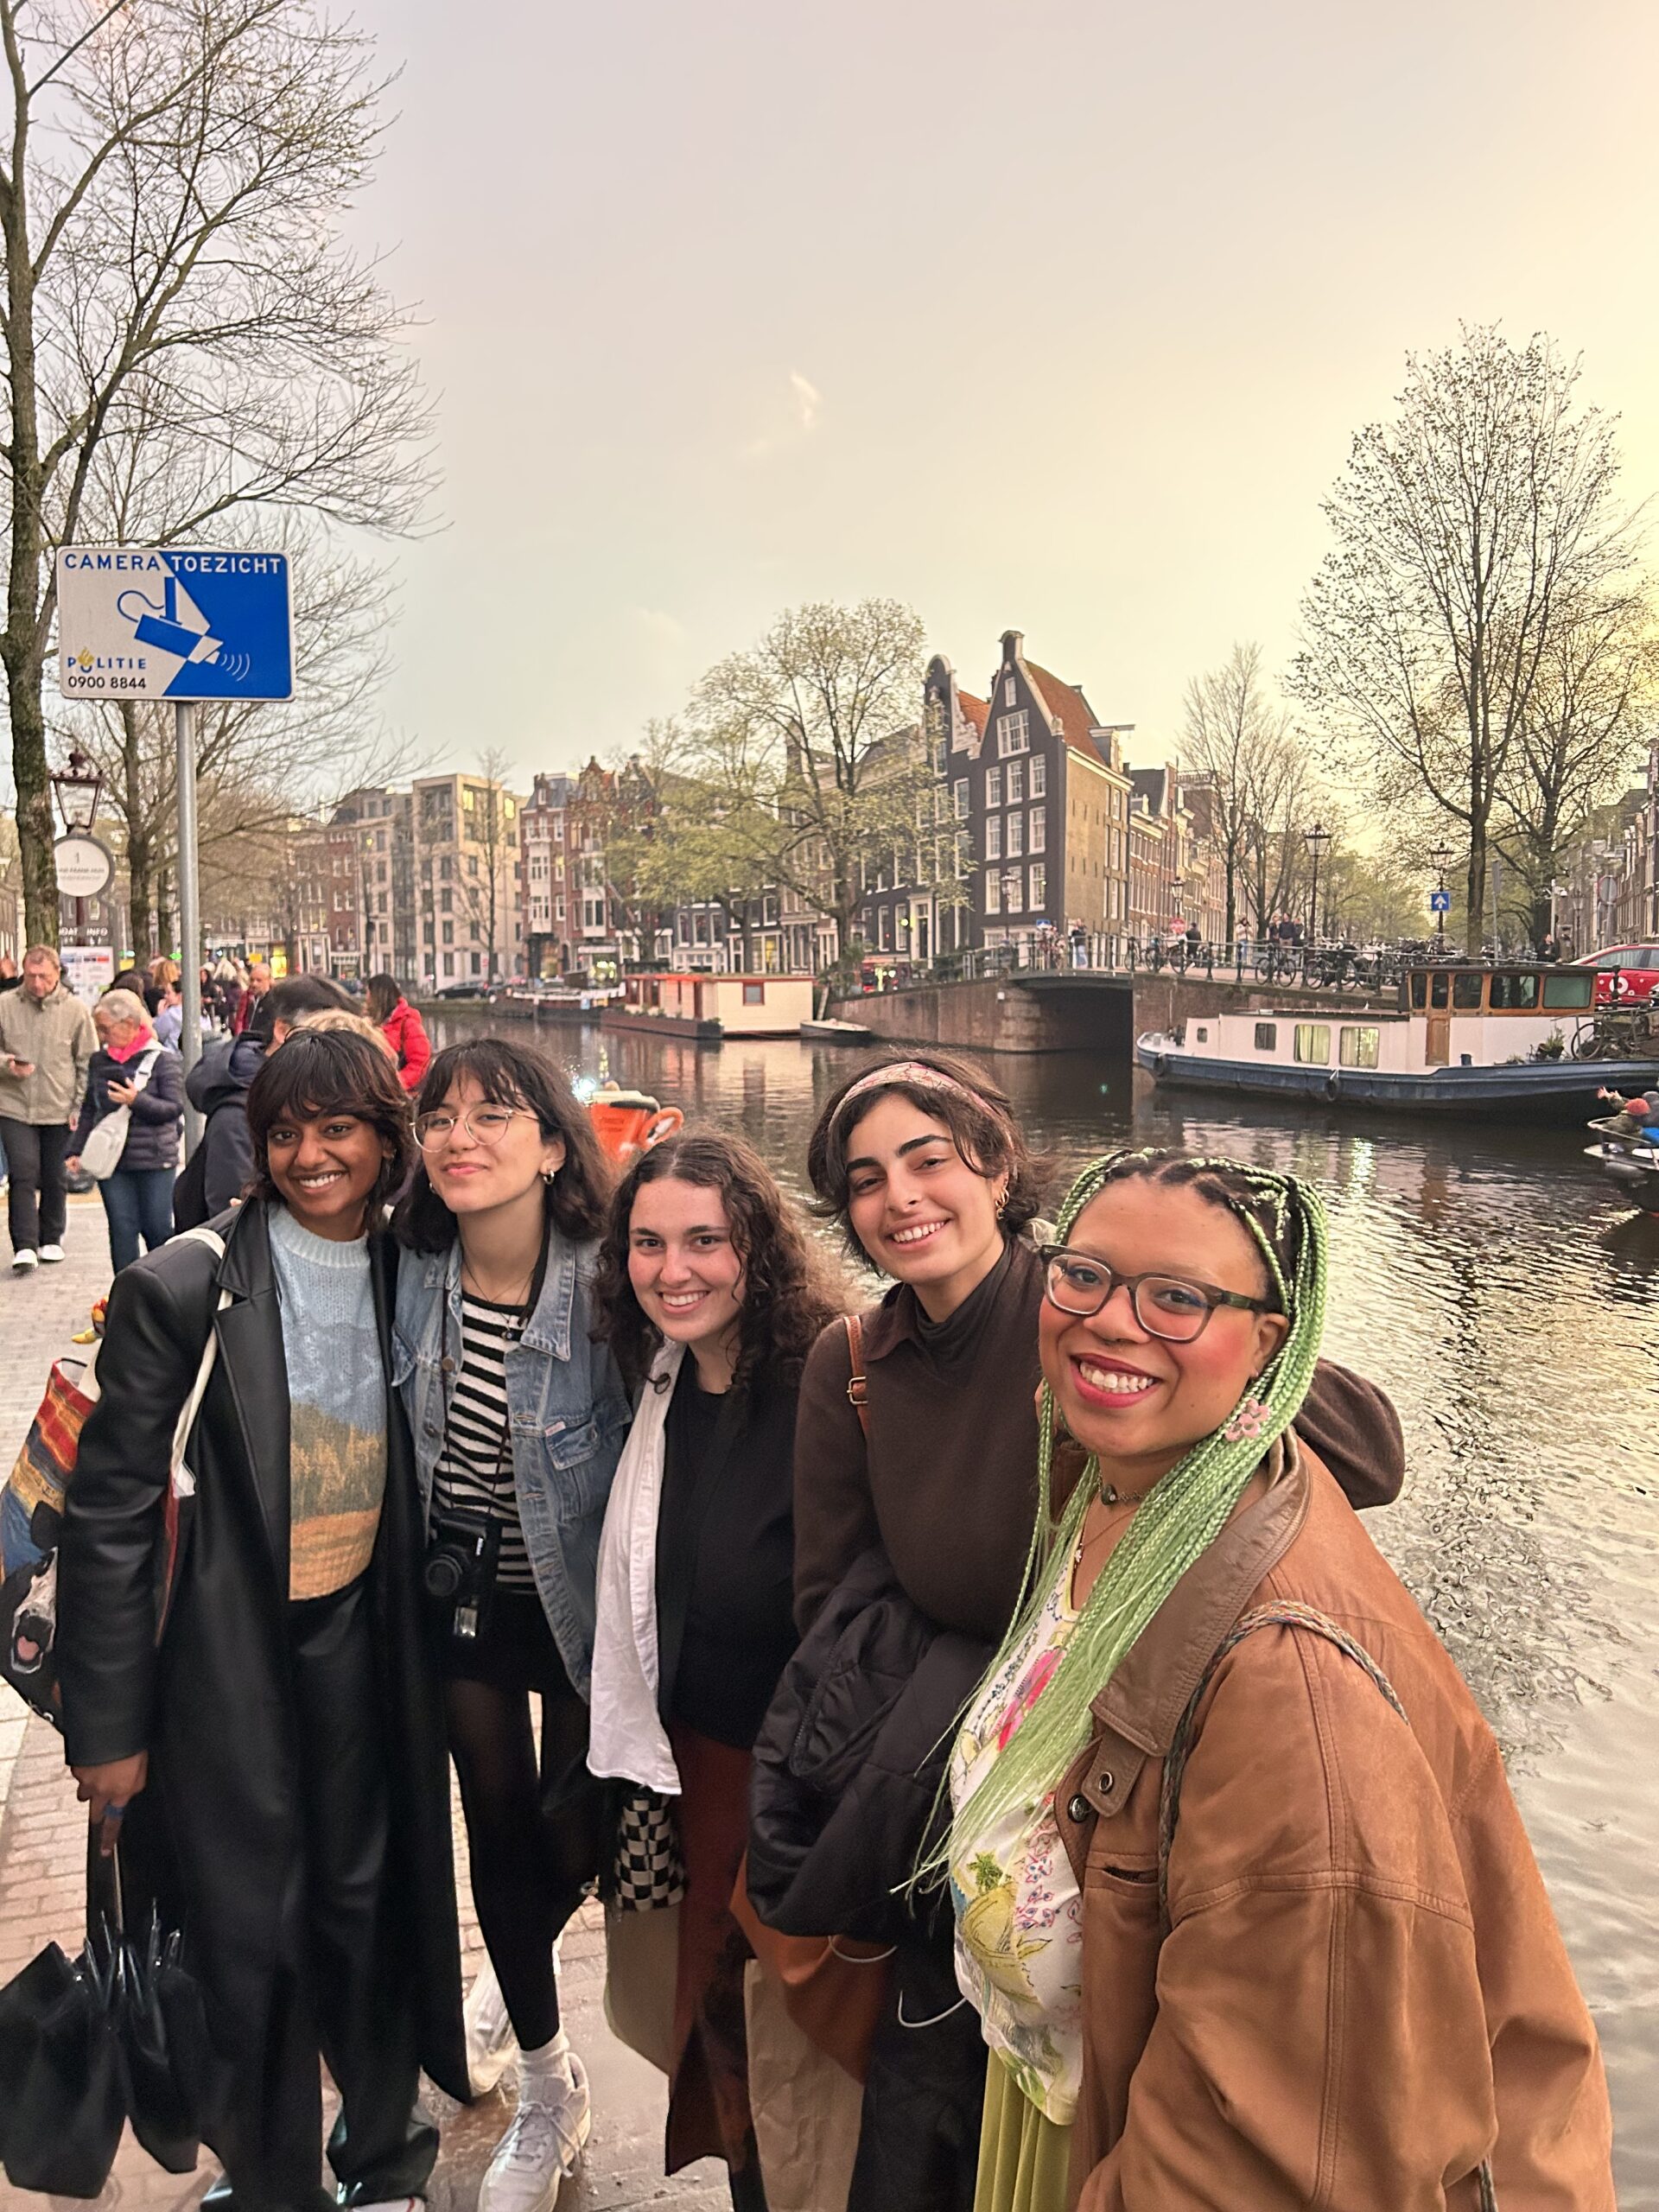 The author, Sade, and some friends along a canal in Amsterdam.